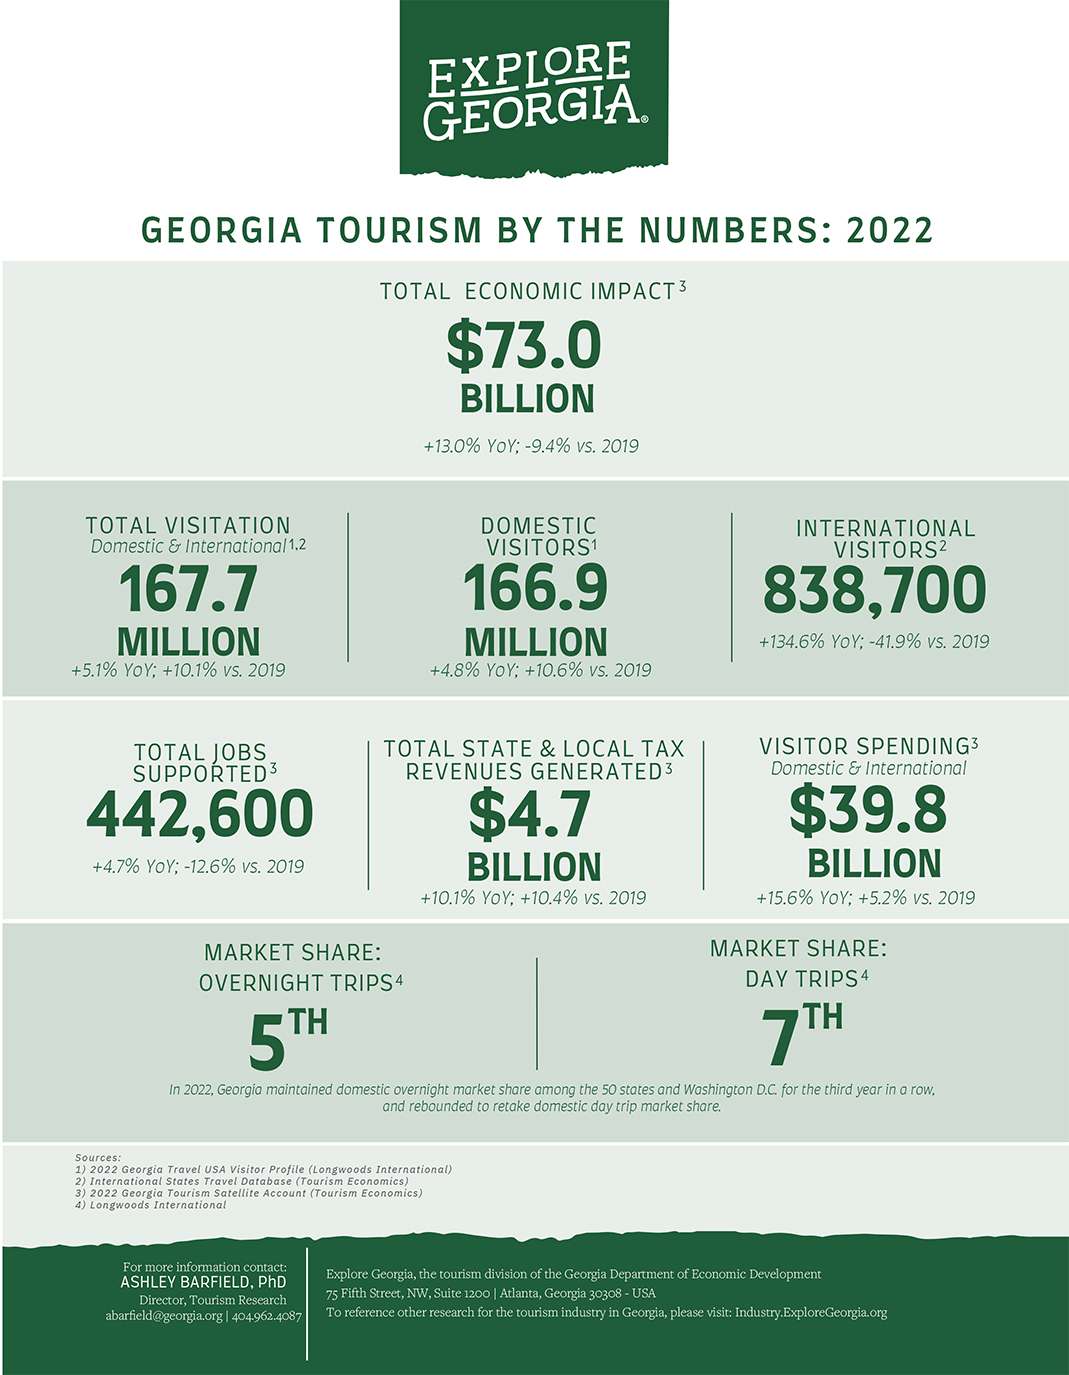 GA Tourism by the numbers 2022_BACKUP.pdf